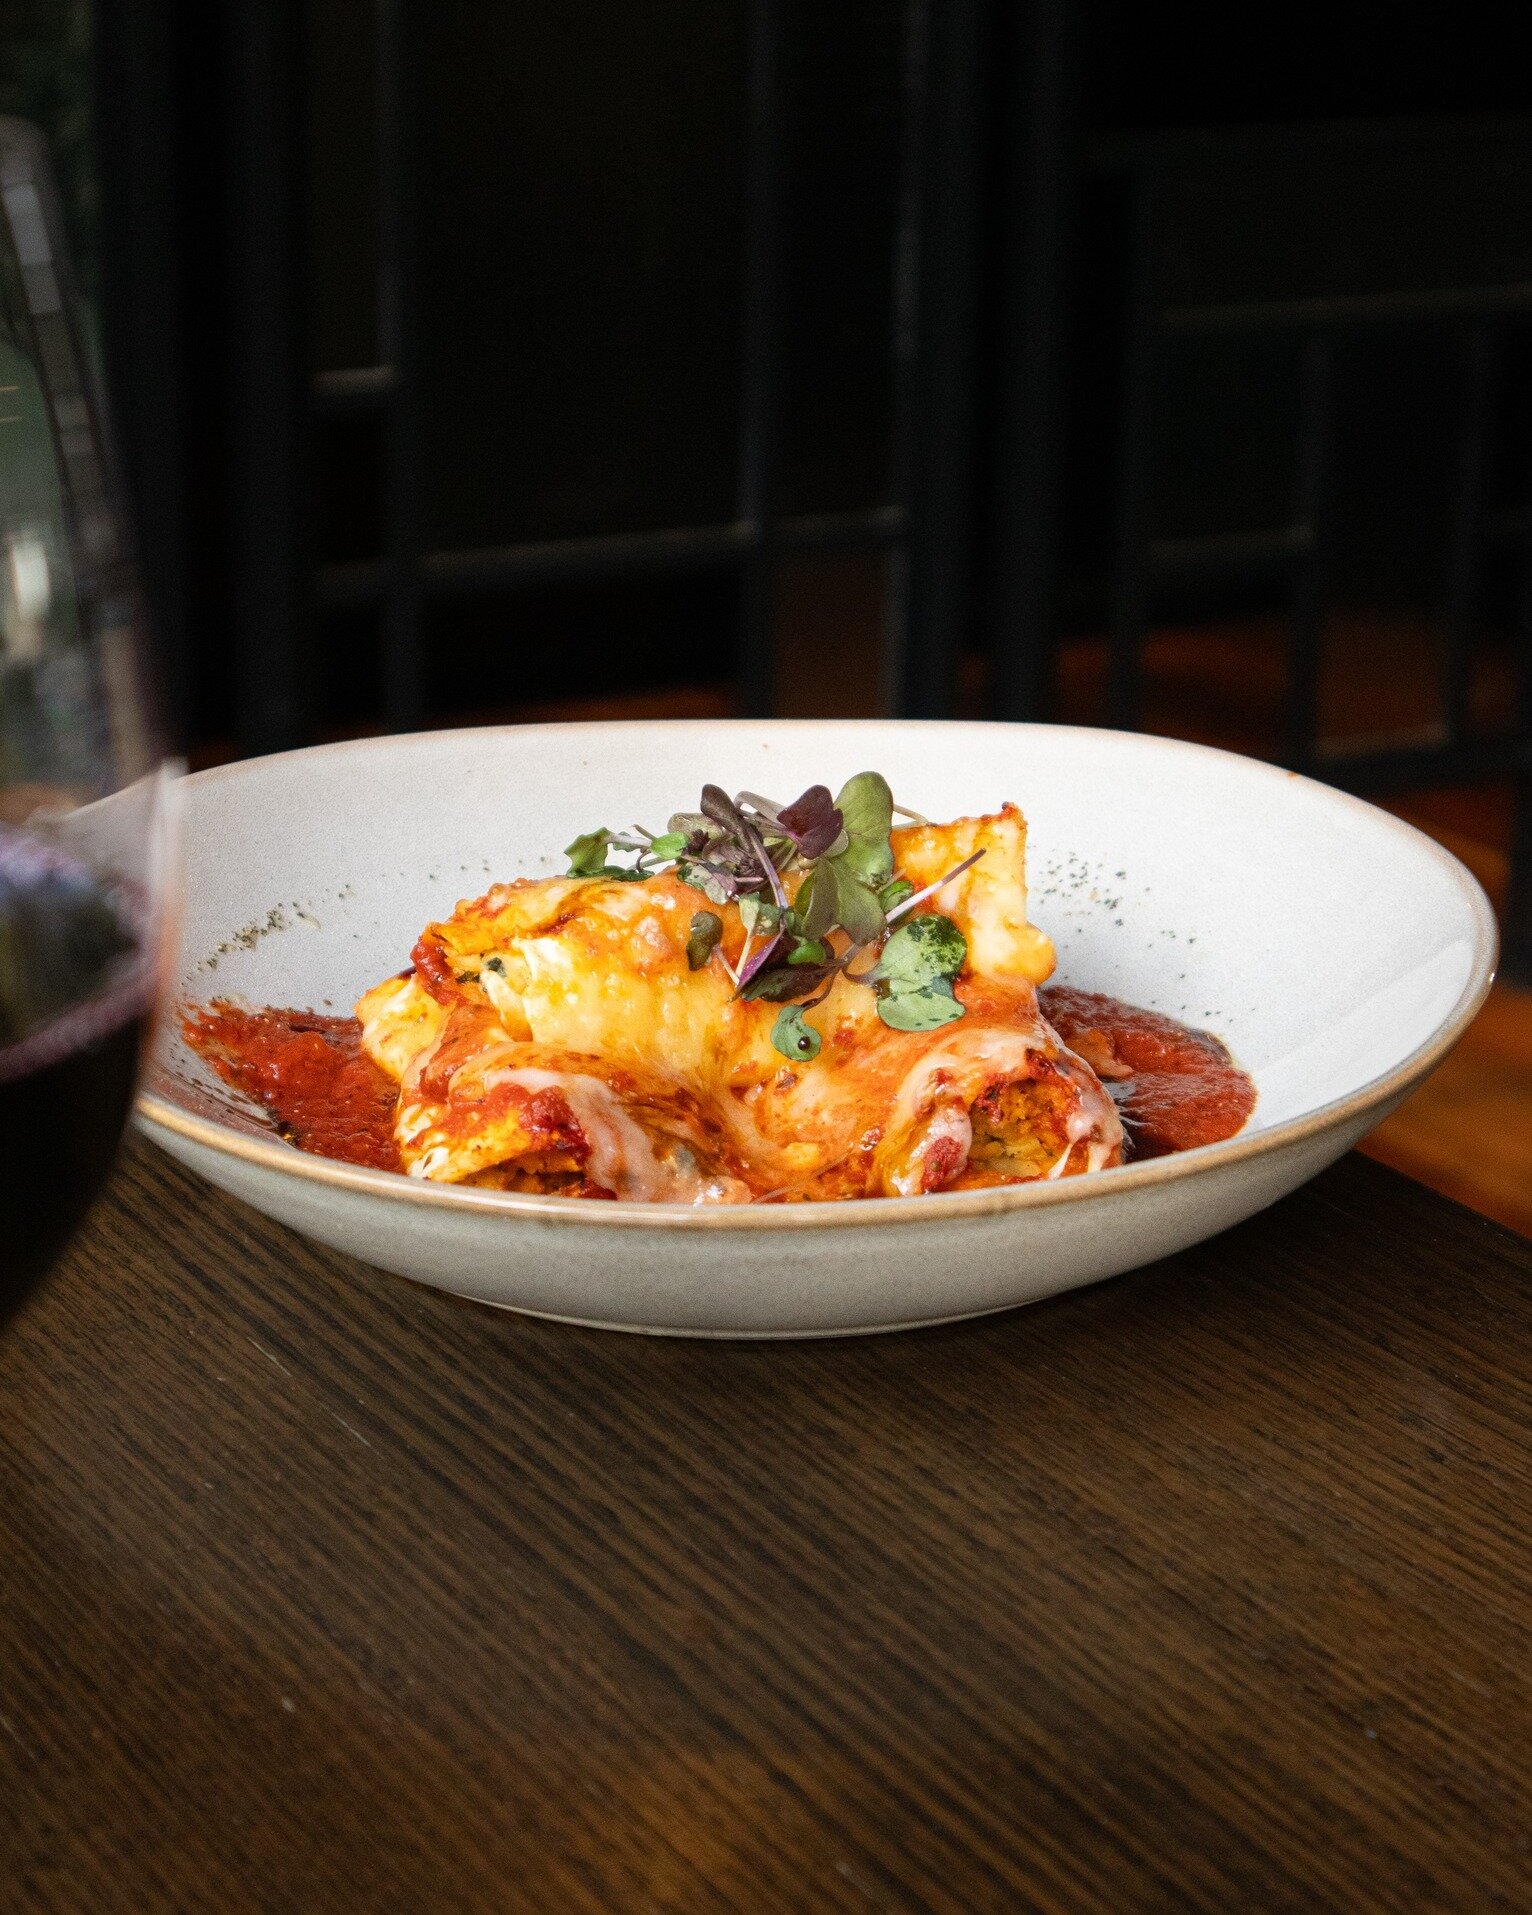 Have you tried our Chefs' Specials this week? Our Cannelloni filled with ricotta and spinach, tomato sugo, parmesan.
Book your table now!

#thecamden #specialoffer #foodphotography #whatson #foodlover #foodies #foodpics #promo #deal #discount #foodga